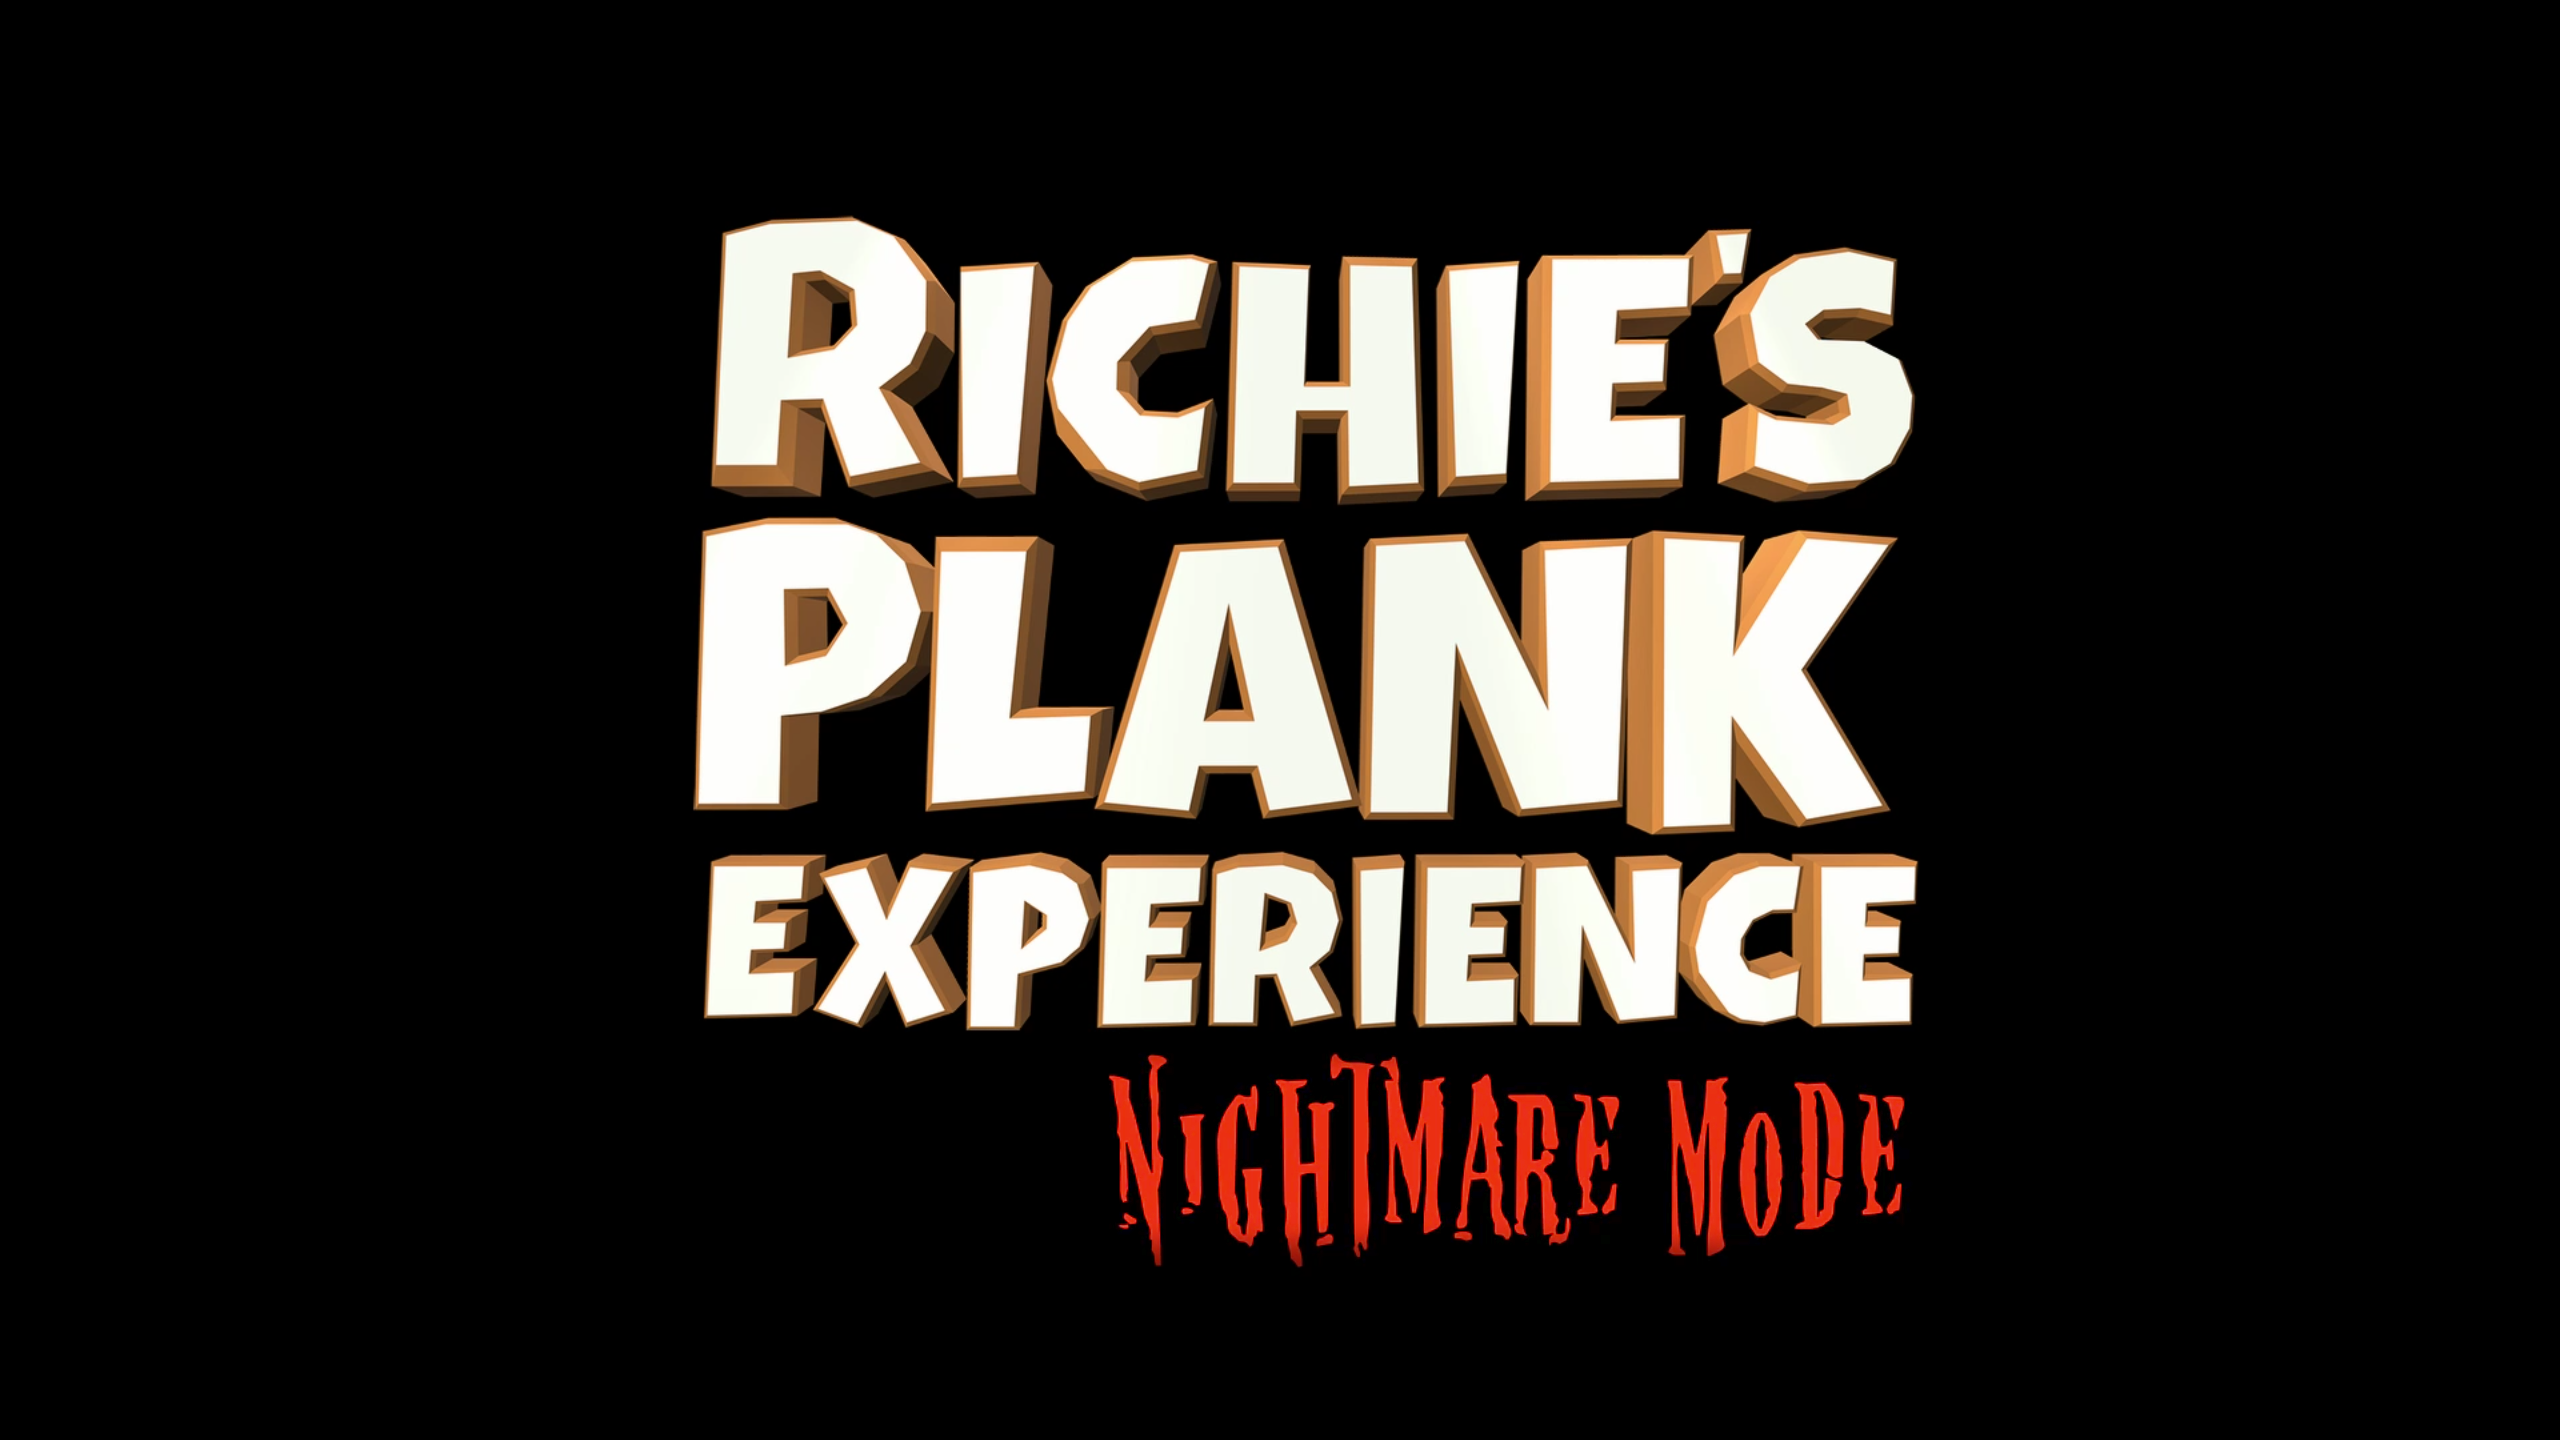 Richie's Plank. Richie's Plank experience. Plank experience VR. Richie Plank experience. Plank experience